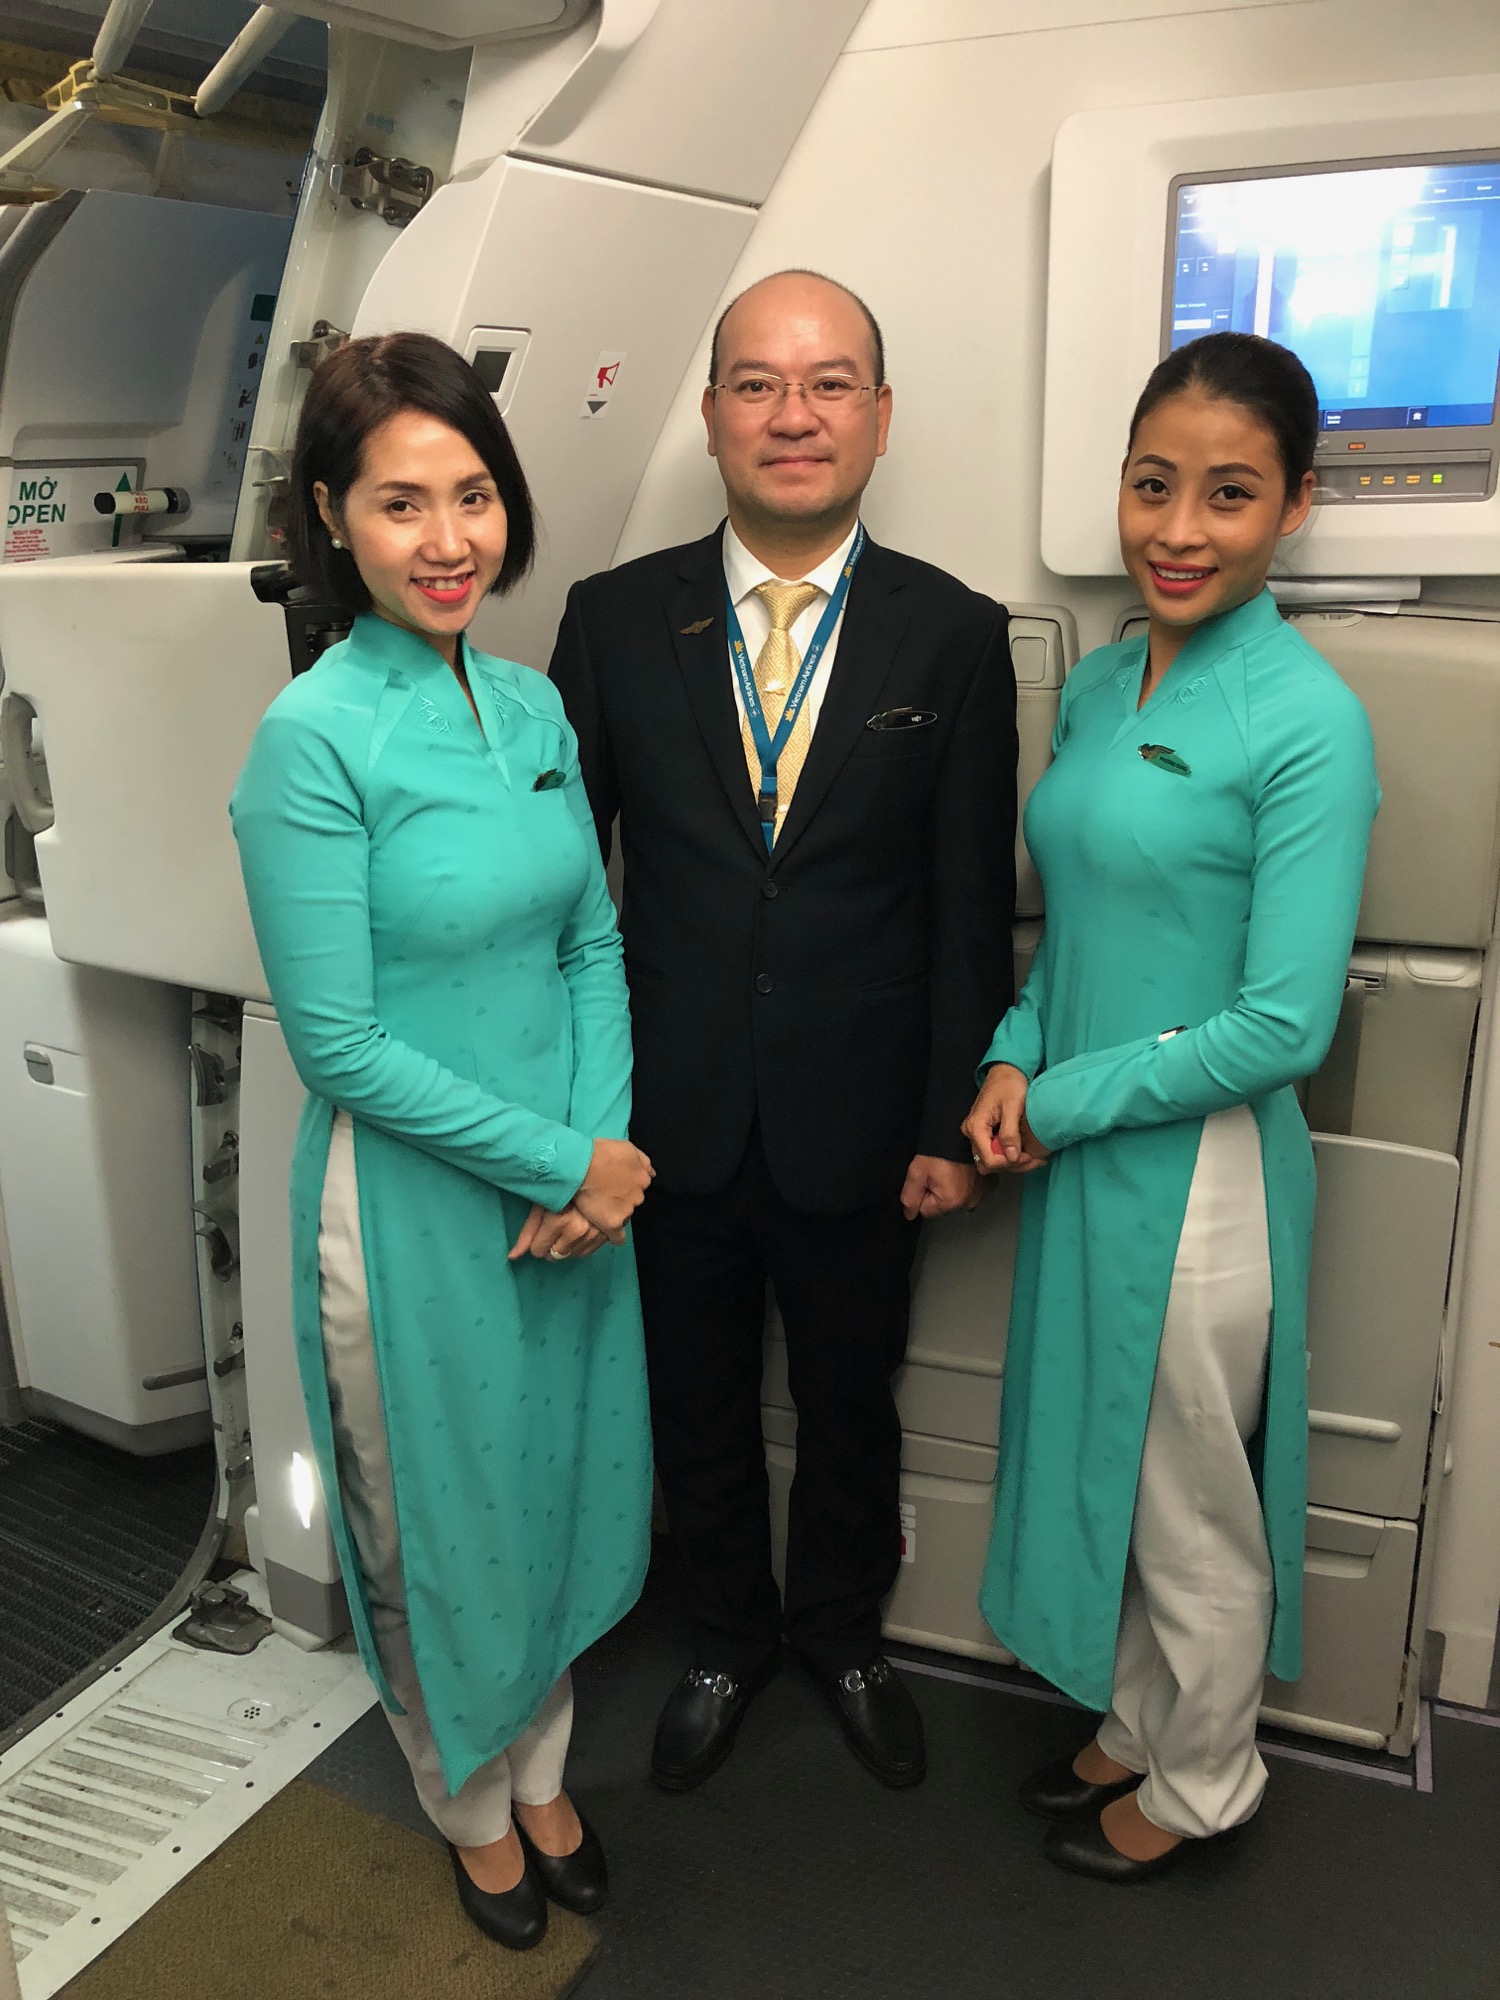 a man and two women standing in a plane